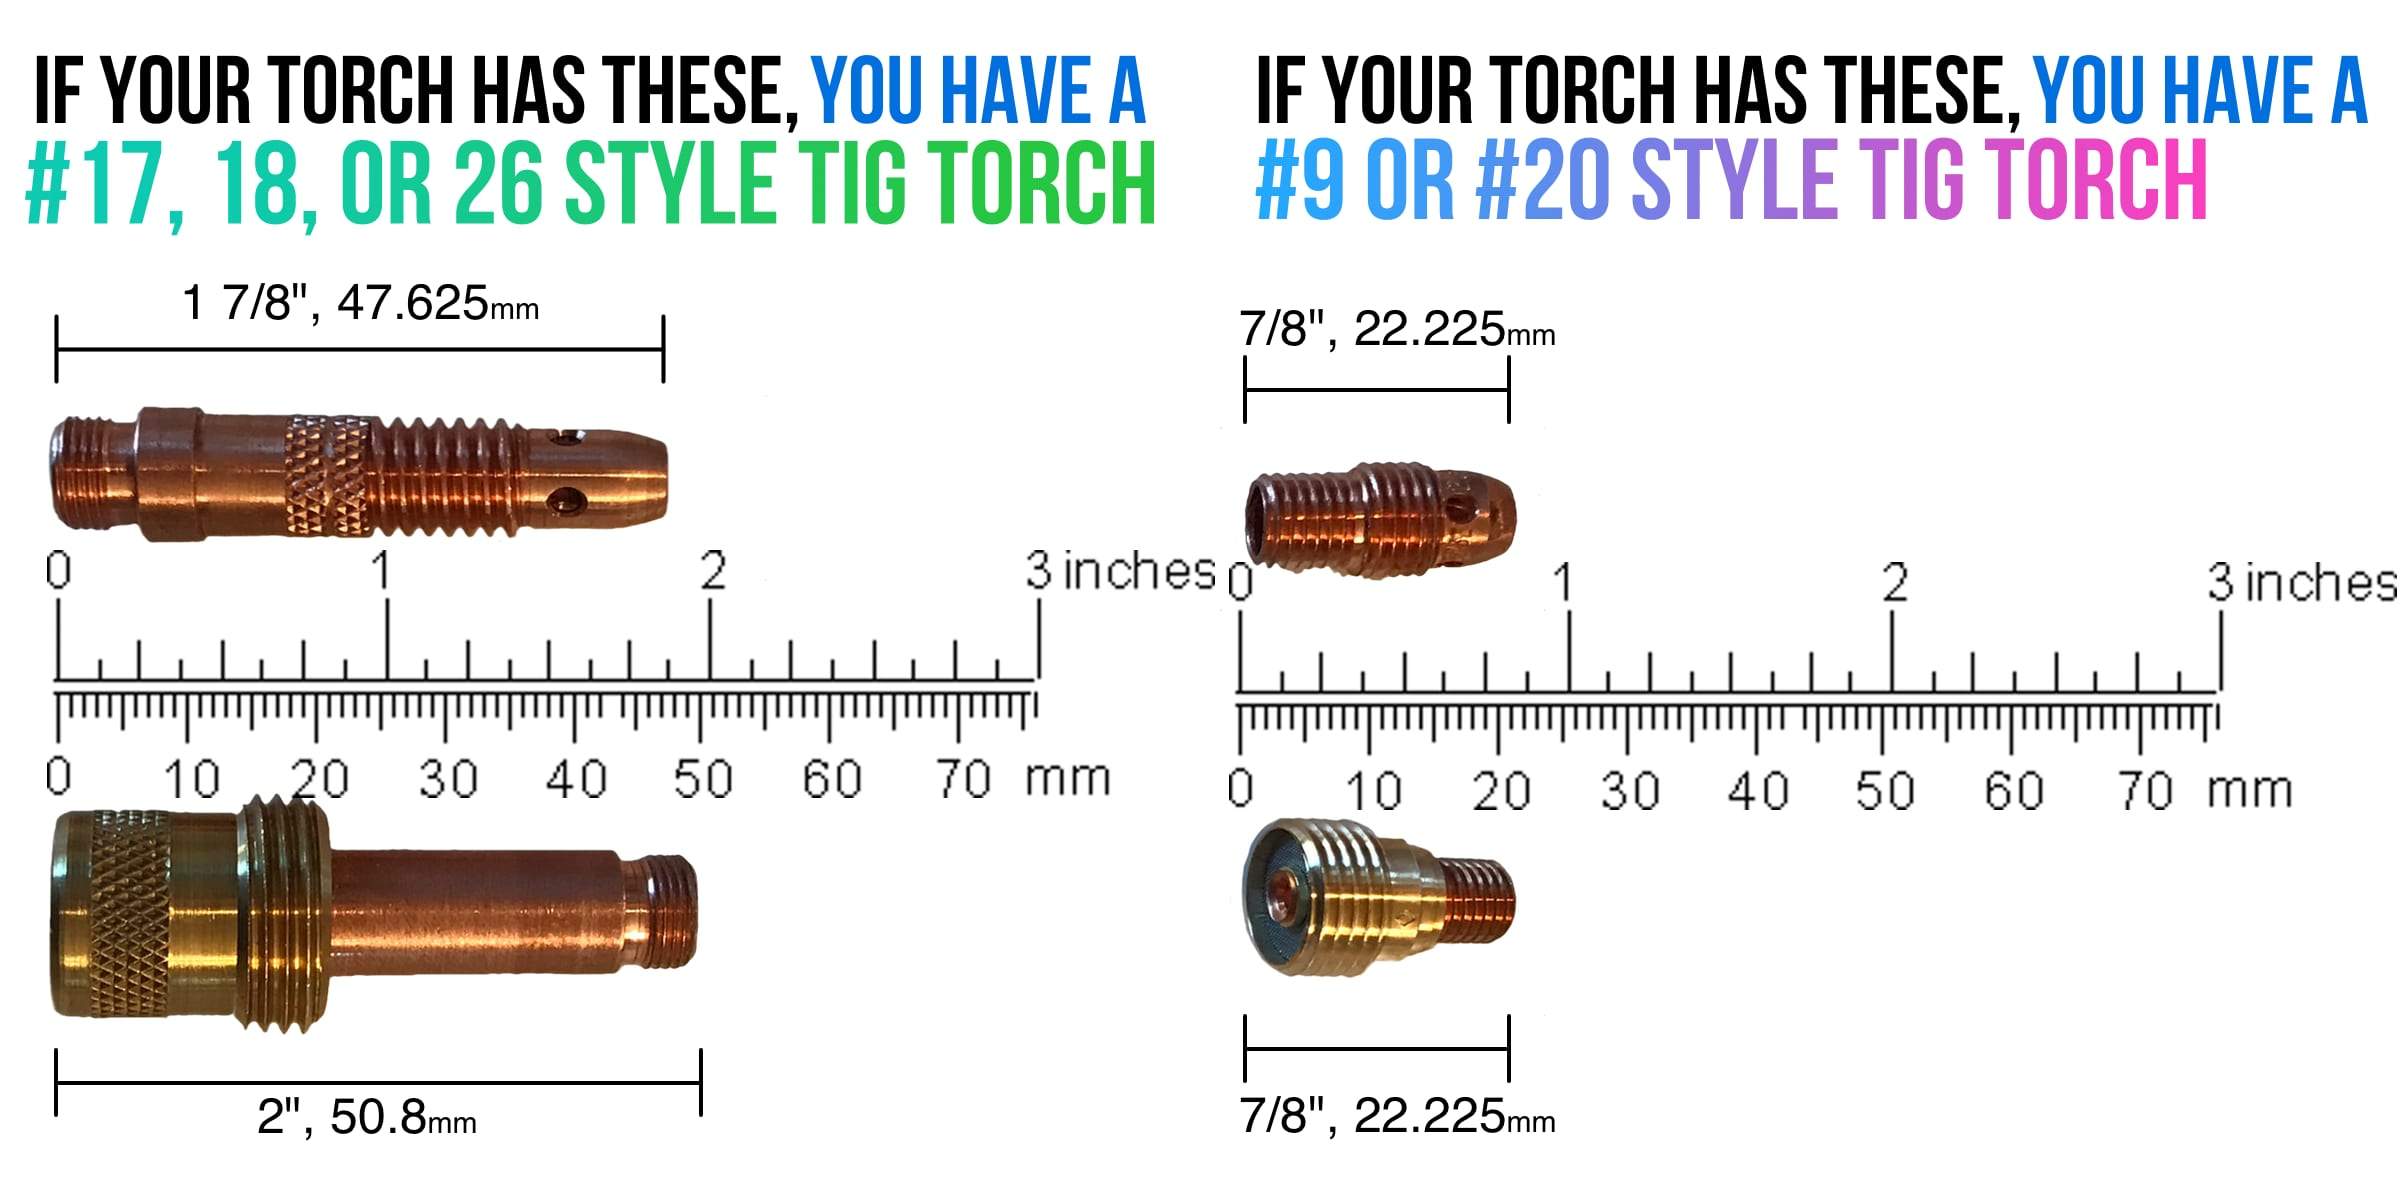 Torch Sizing